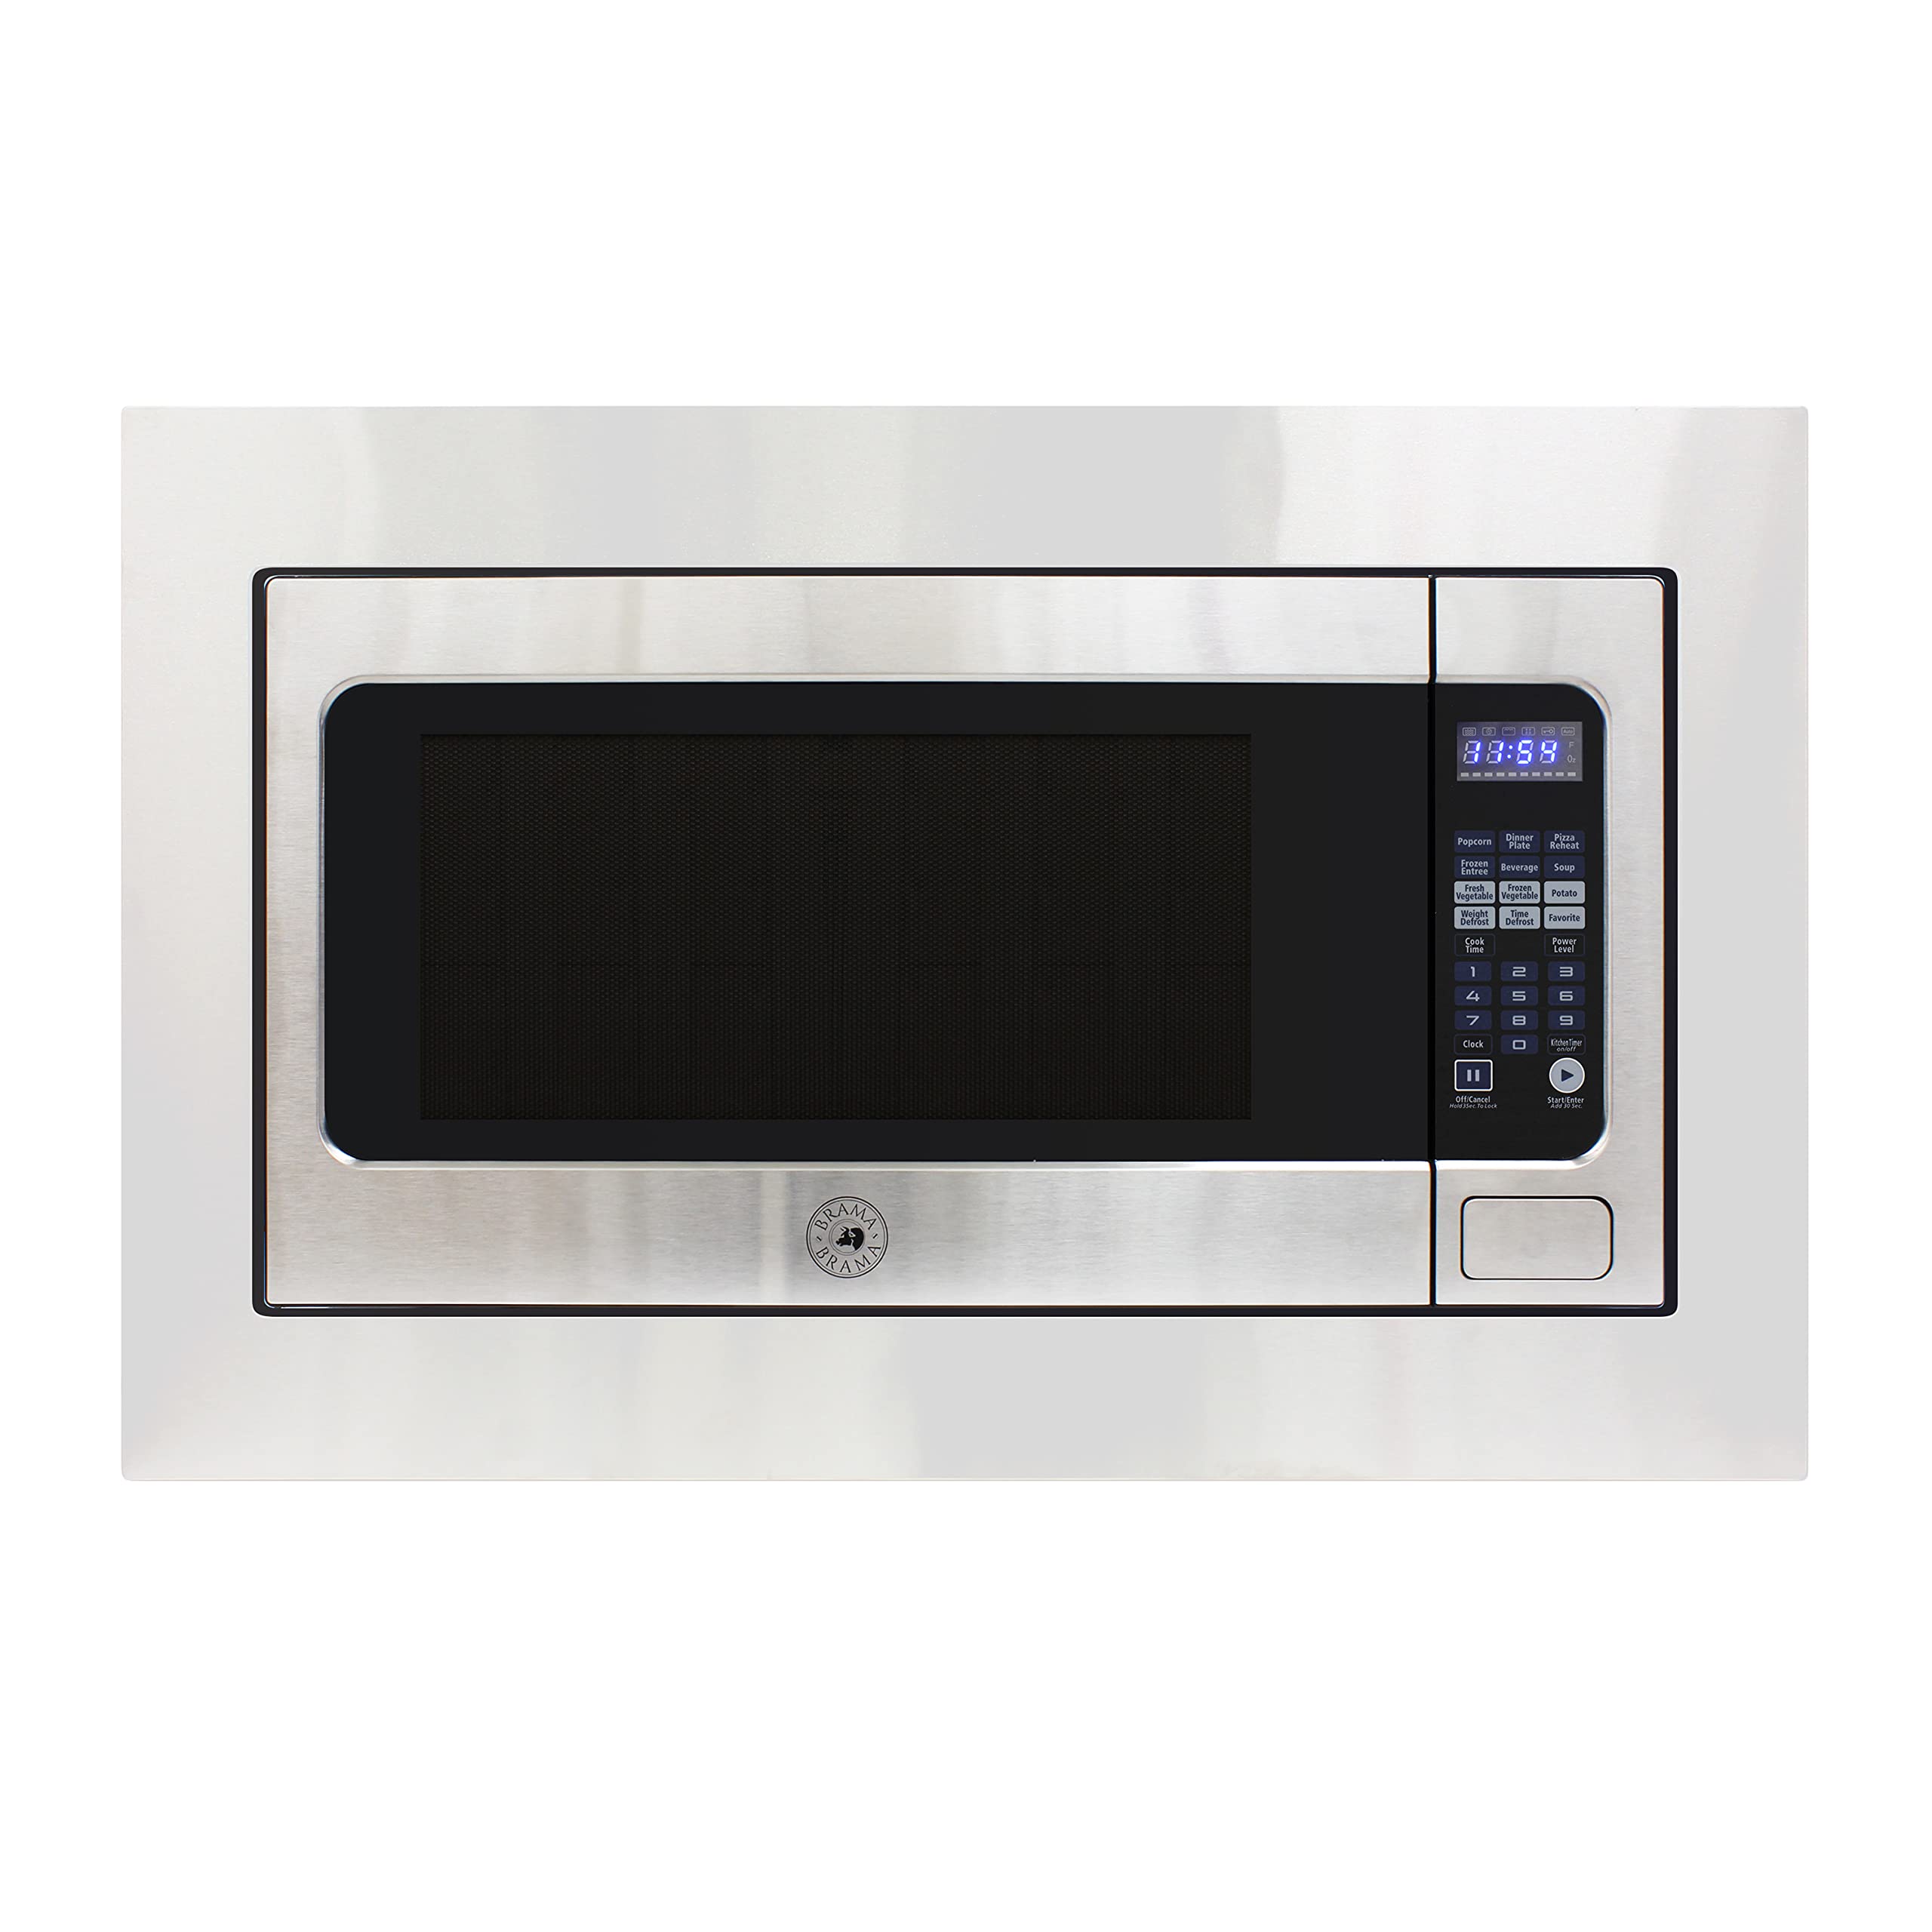 Brama Microwave Oven Built-In 1200-Watts with 10 Power Levels Pre-Set Cooking Settings and Express Cook, Sensor and Speed Cooking and Silent Mode with Glass Turntable, 2.2 Cu.Ft., Metallic